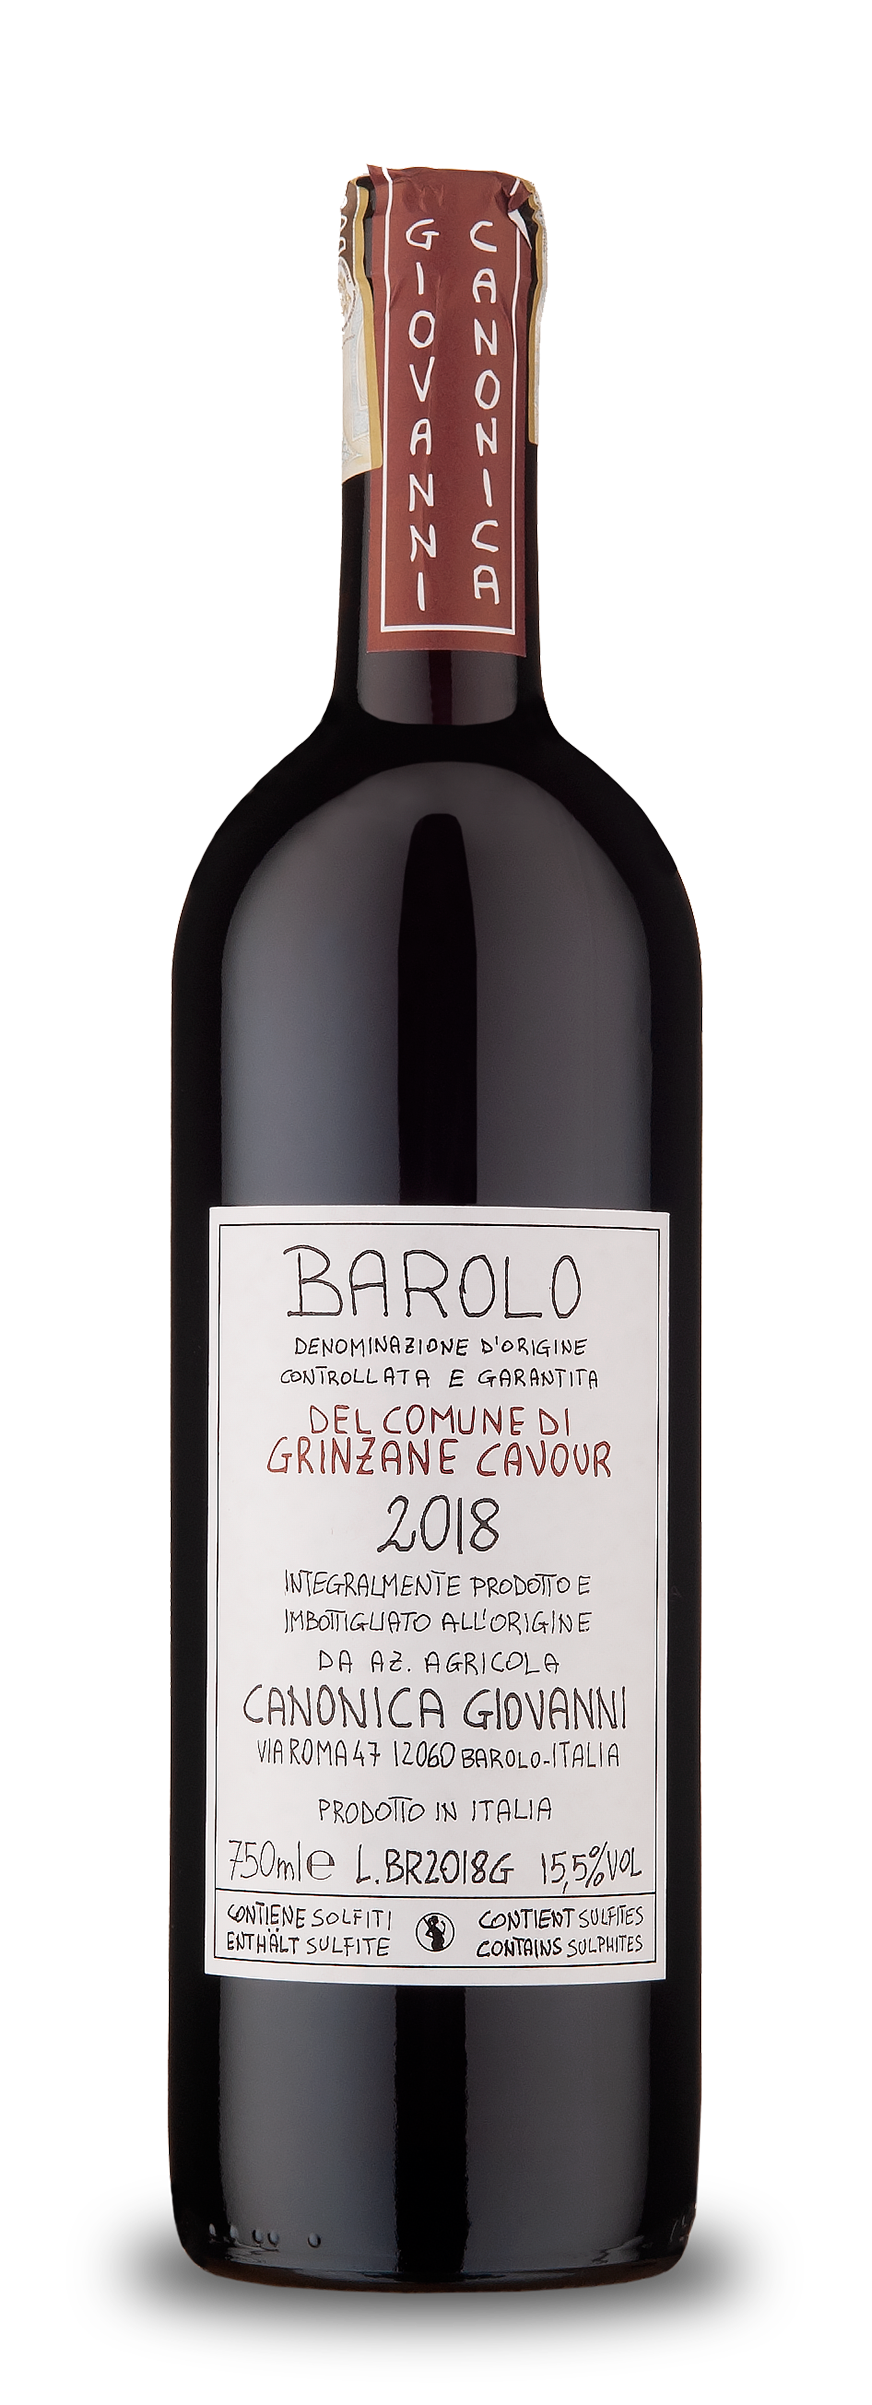 Barolo del Comune di Grinzane Cavour 2018 - ONLY ON PRE-ALLOCATION Contact us for further information (indulge@flemmings.wine)